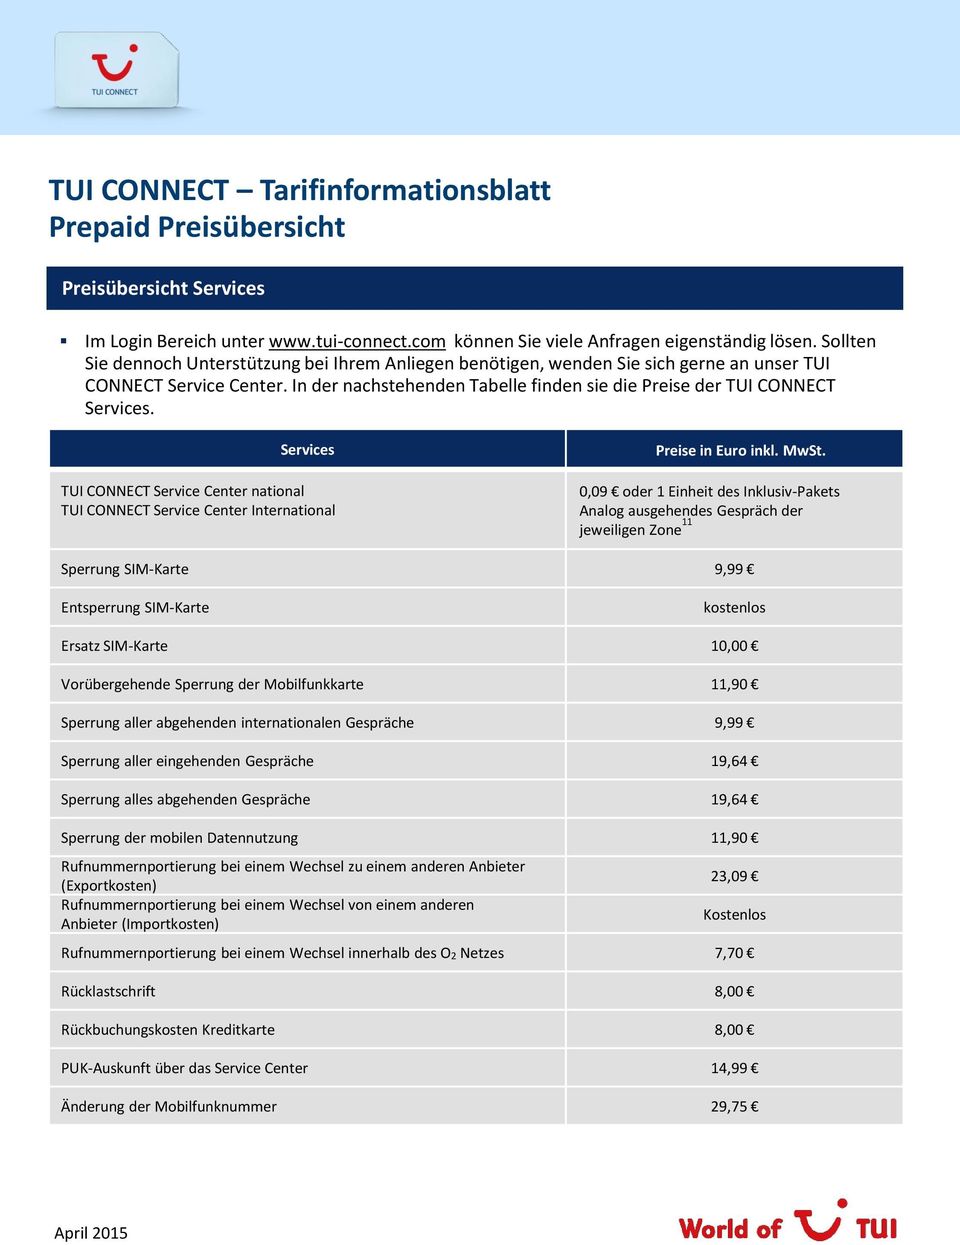 Services TUI CONNECT Service Center national TUI CONNECT Service Center International Preise in Euro inkl. MwSt.